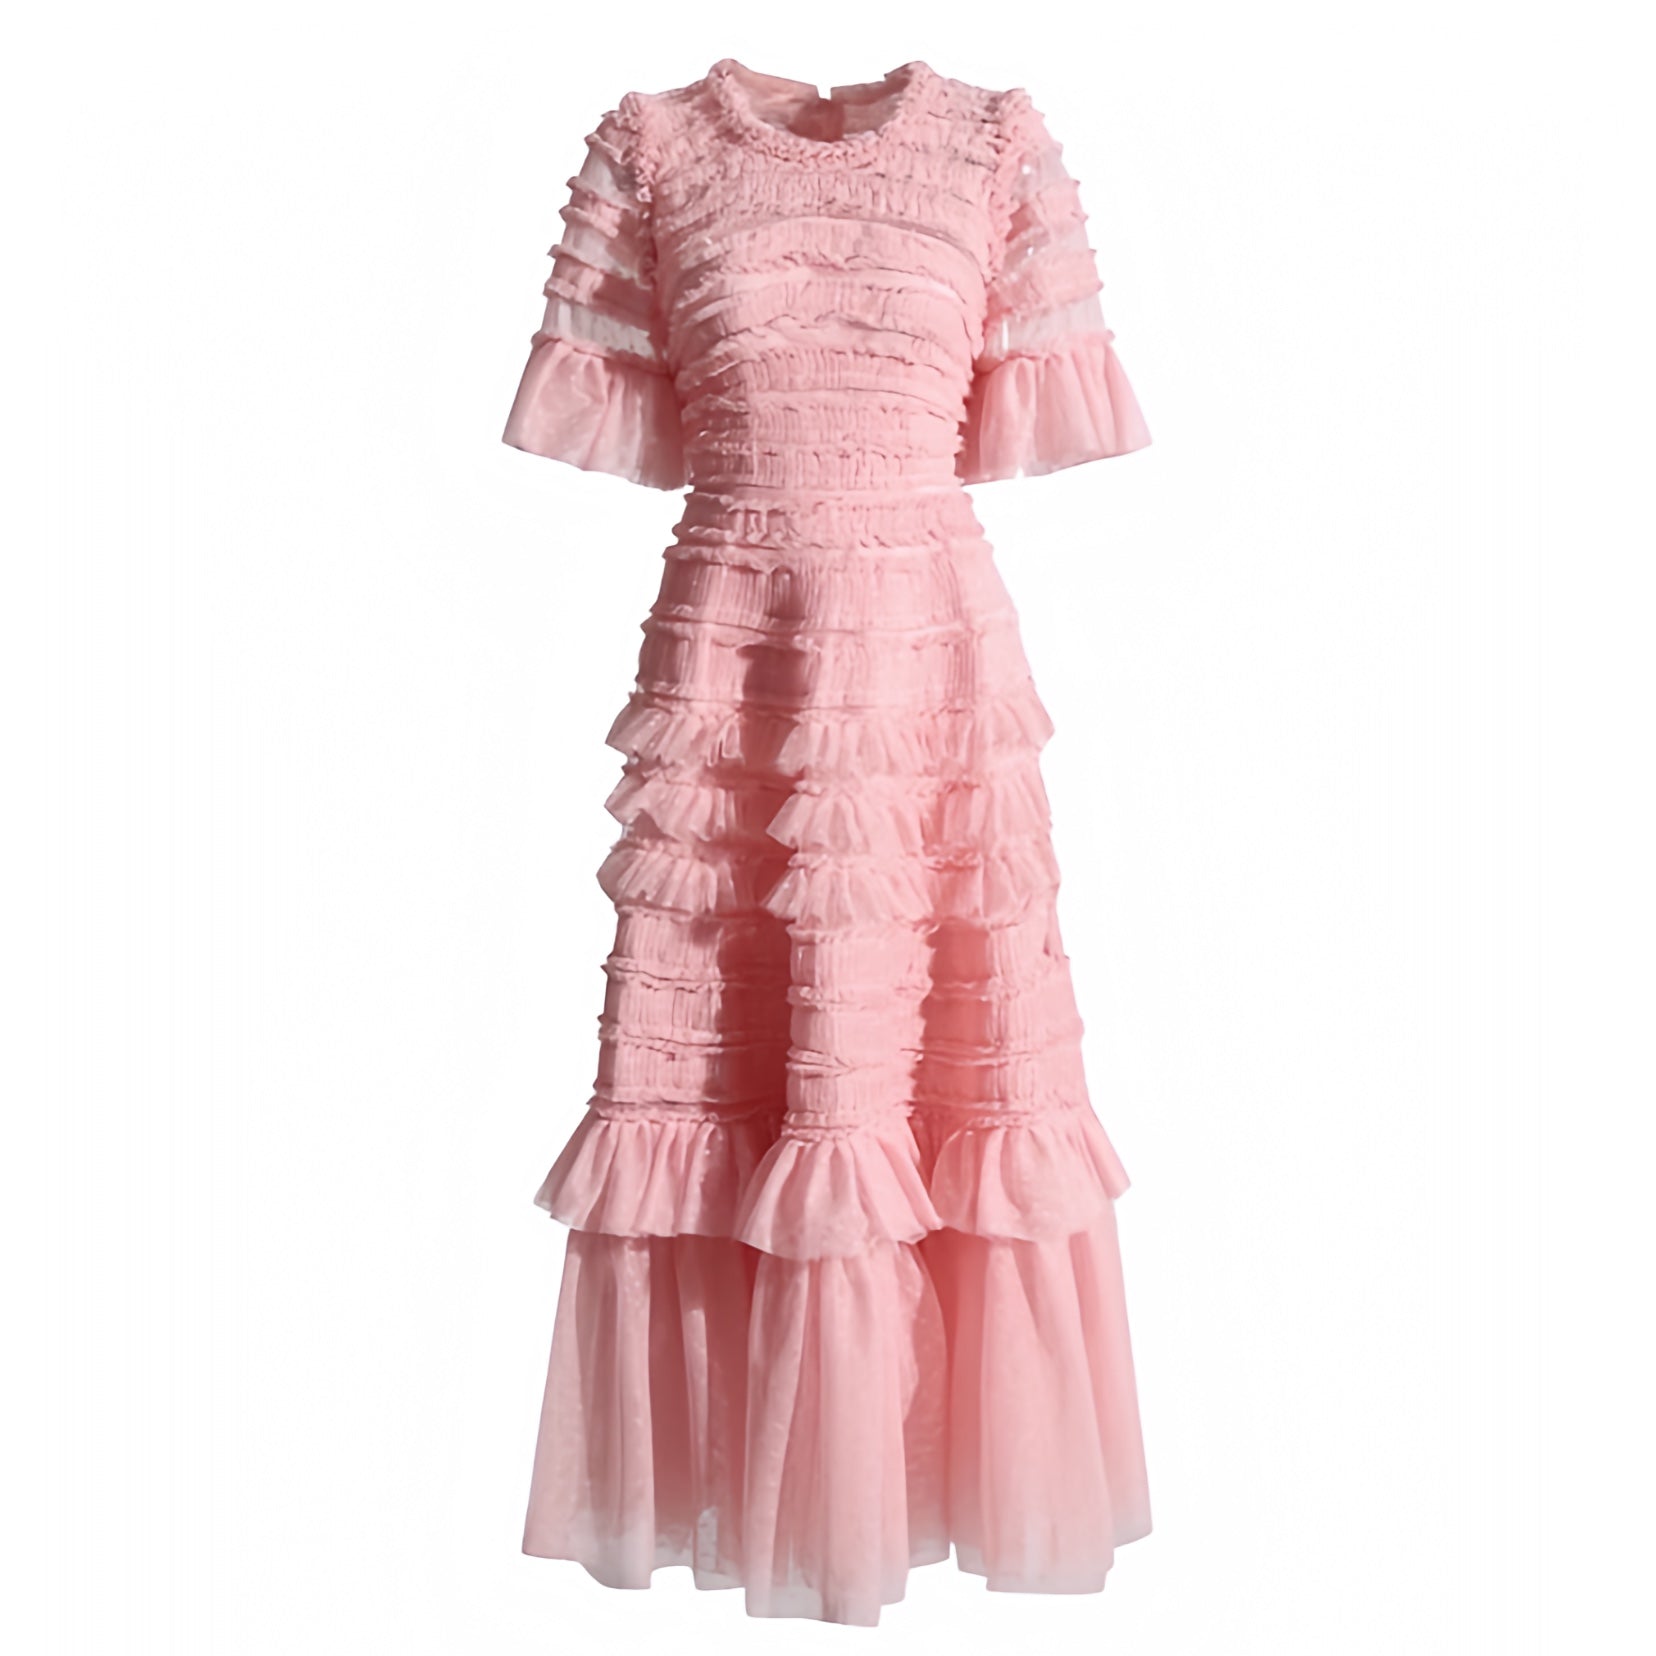 light-pink-layered-ruffle-trim-feathered-mesh-patterned-bodycon-slim-fitted-bodice-drop-waist-round-neck-short-sleeve-flowy-tiered-fit-and-flare-midi-long-maxi-dress-ball-gown-couture-women-ladies-chic-trendy-spring-2024-summer-semi-formal-elegant-classy-casual-feminine-gala-prom-debutante-wedding-guest-party-preppy-style-beach-vacation-sundress-zimmerman-revolve-loveshackfancy-dupe